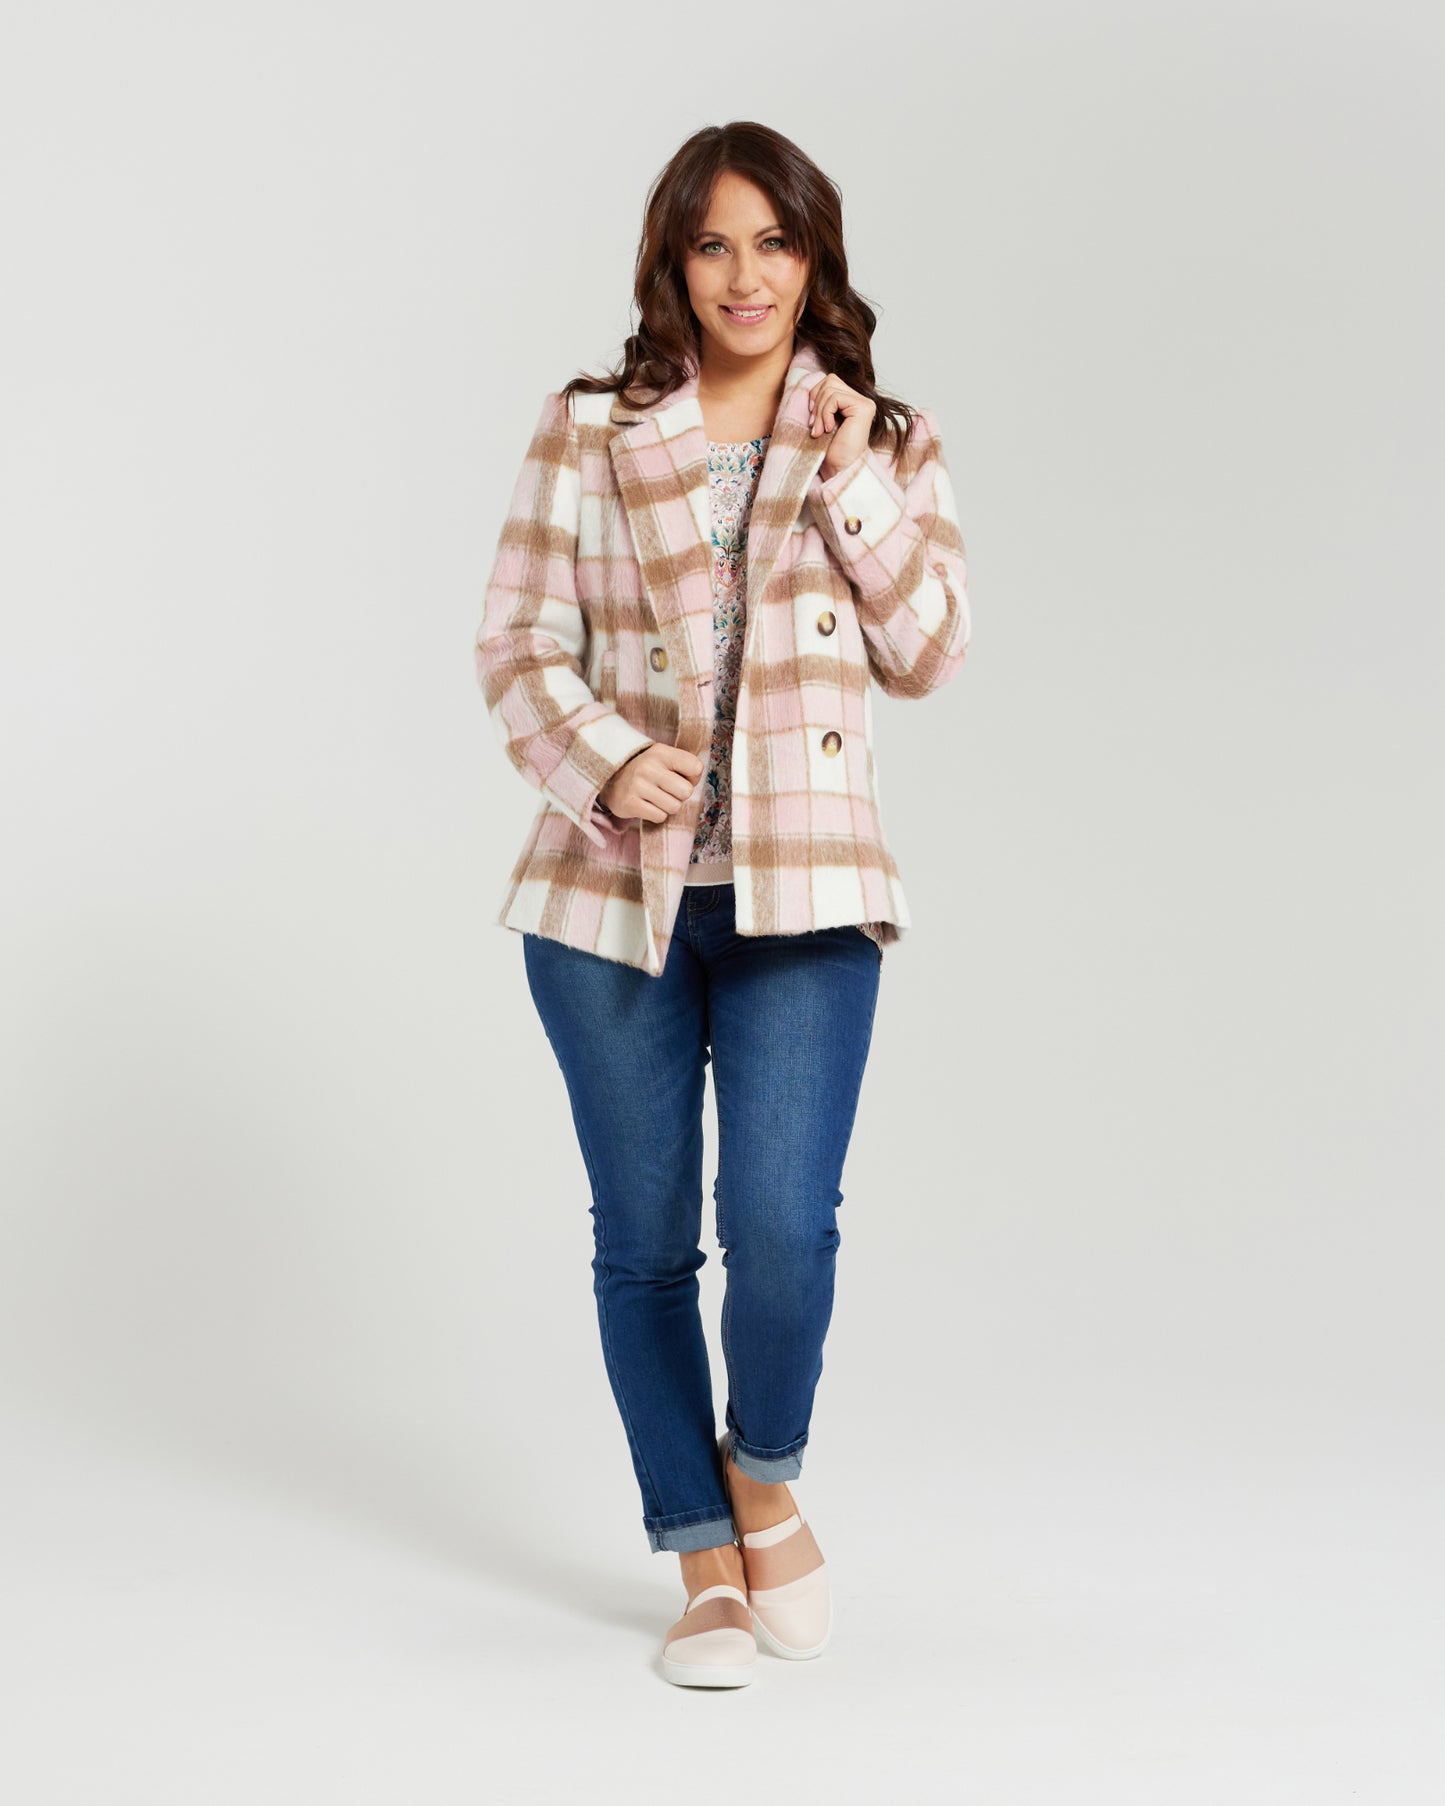 Zafina - Veda Jacket - Fluffy Plaid - Due 1st March